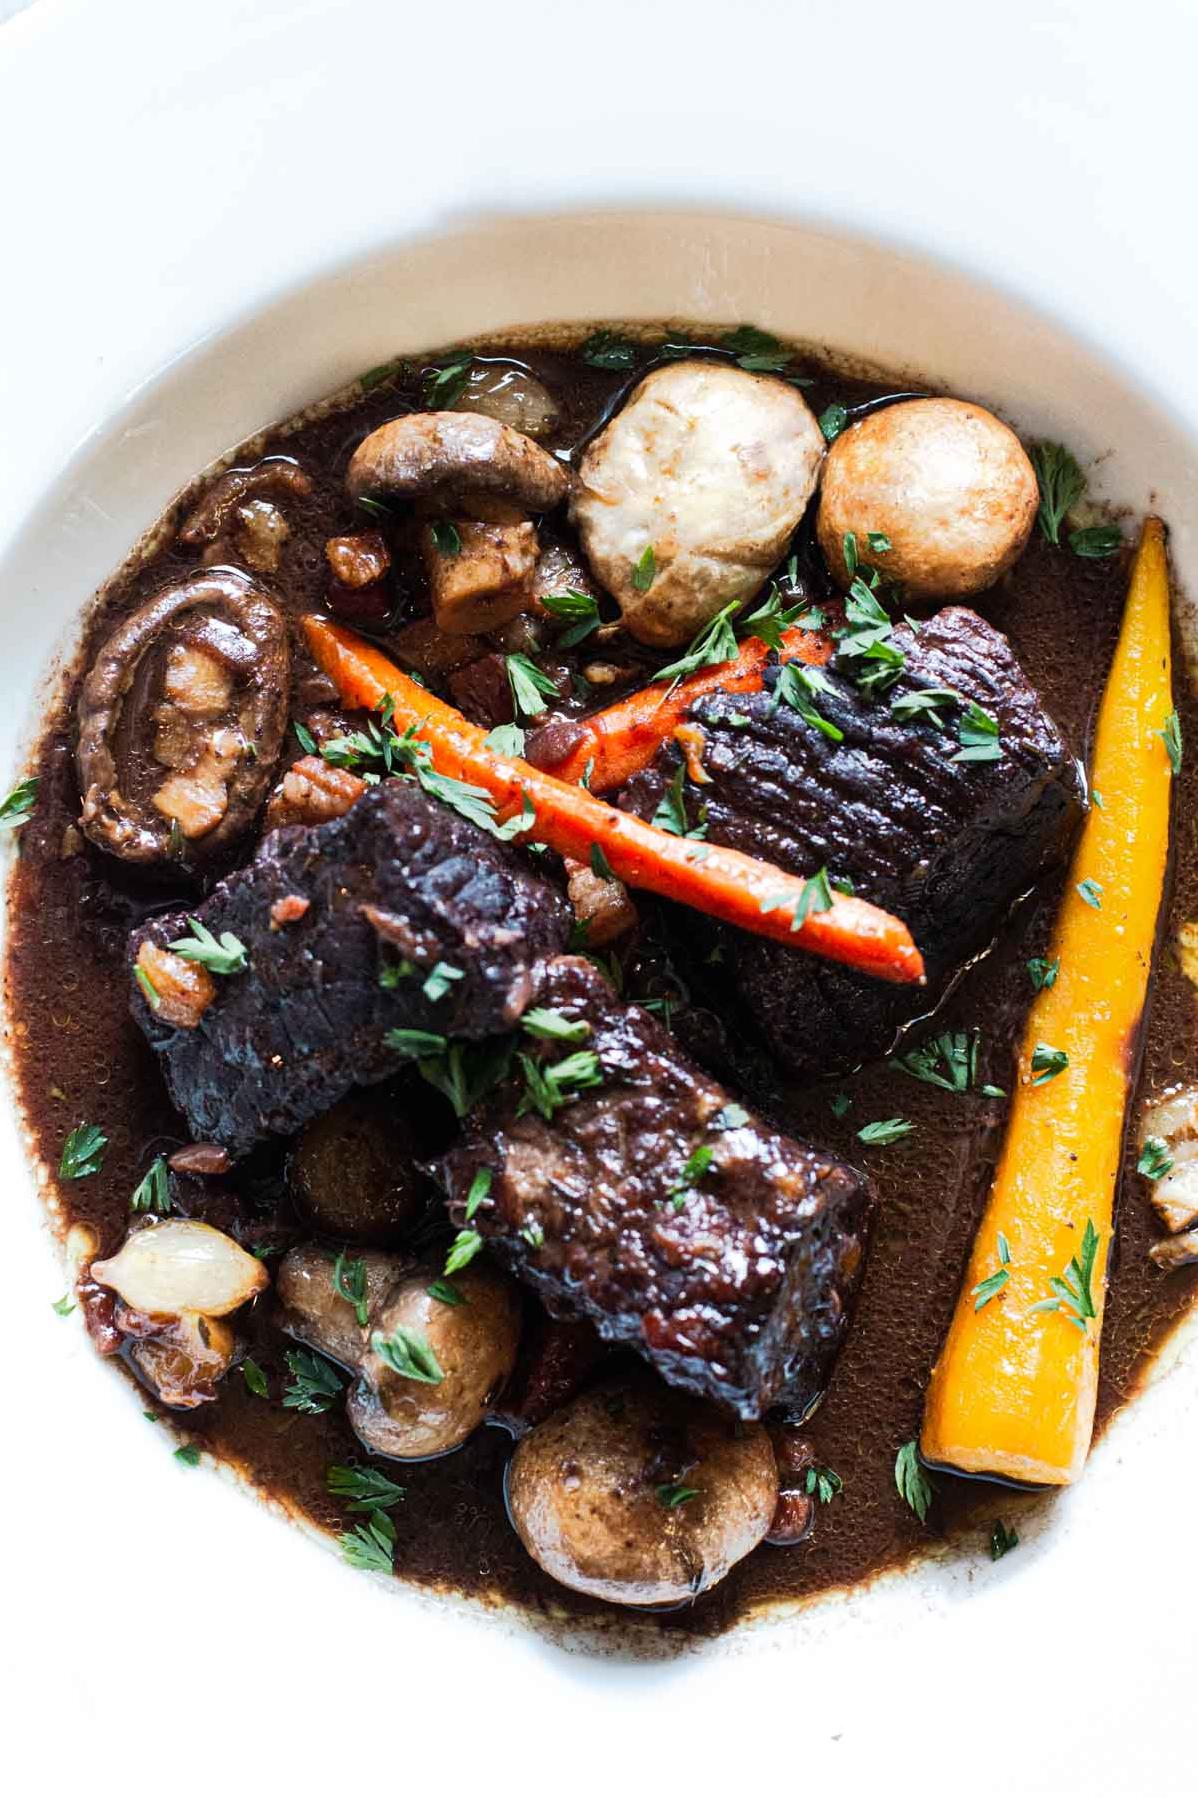  Take a bite and experience the melt-in-your-mouth perfection of slow-cooked beef.